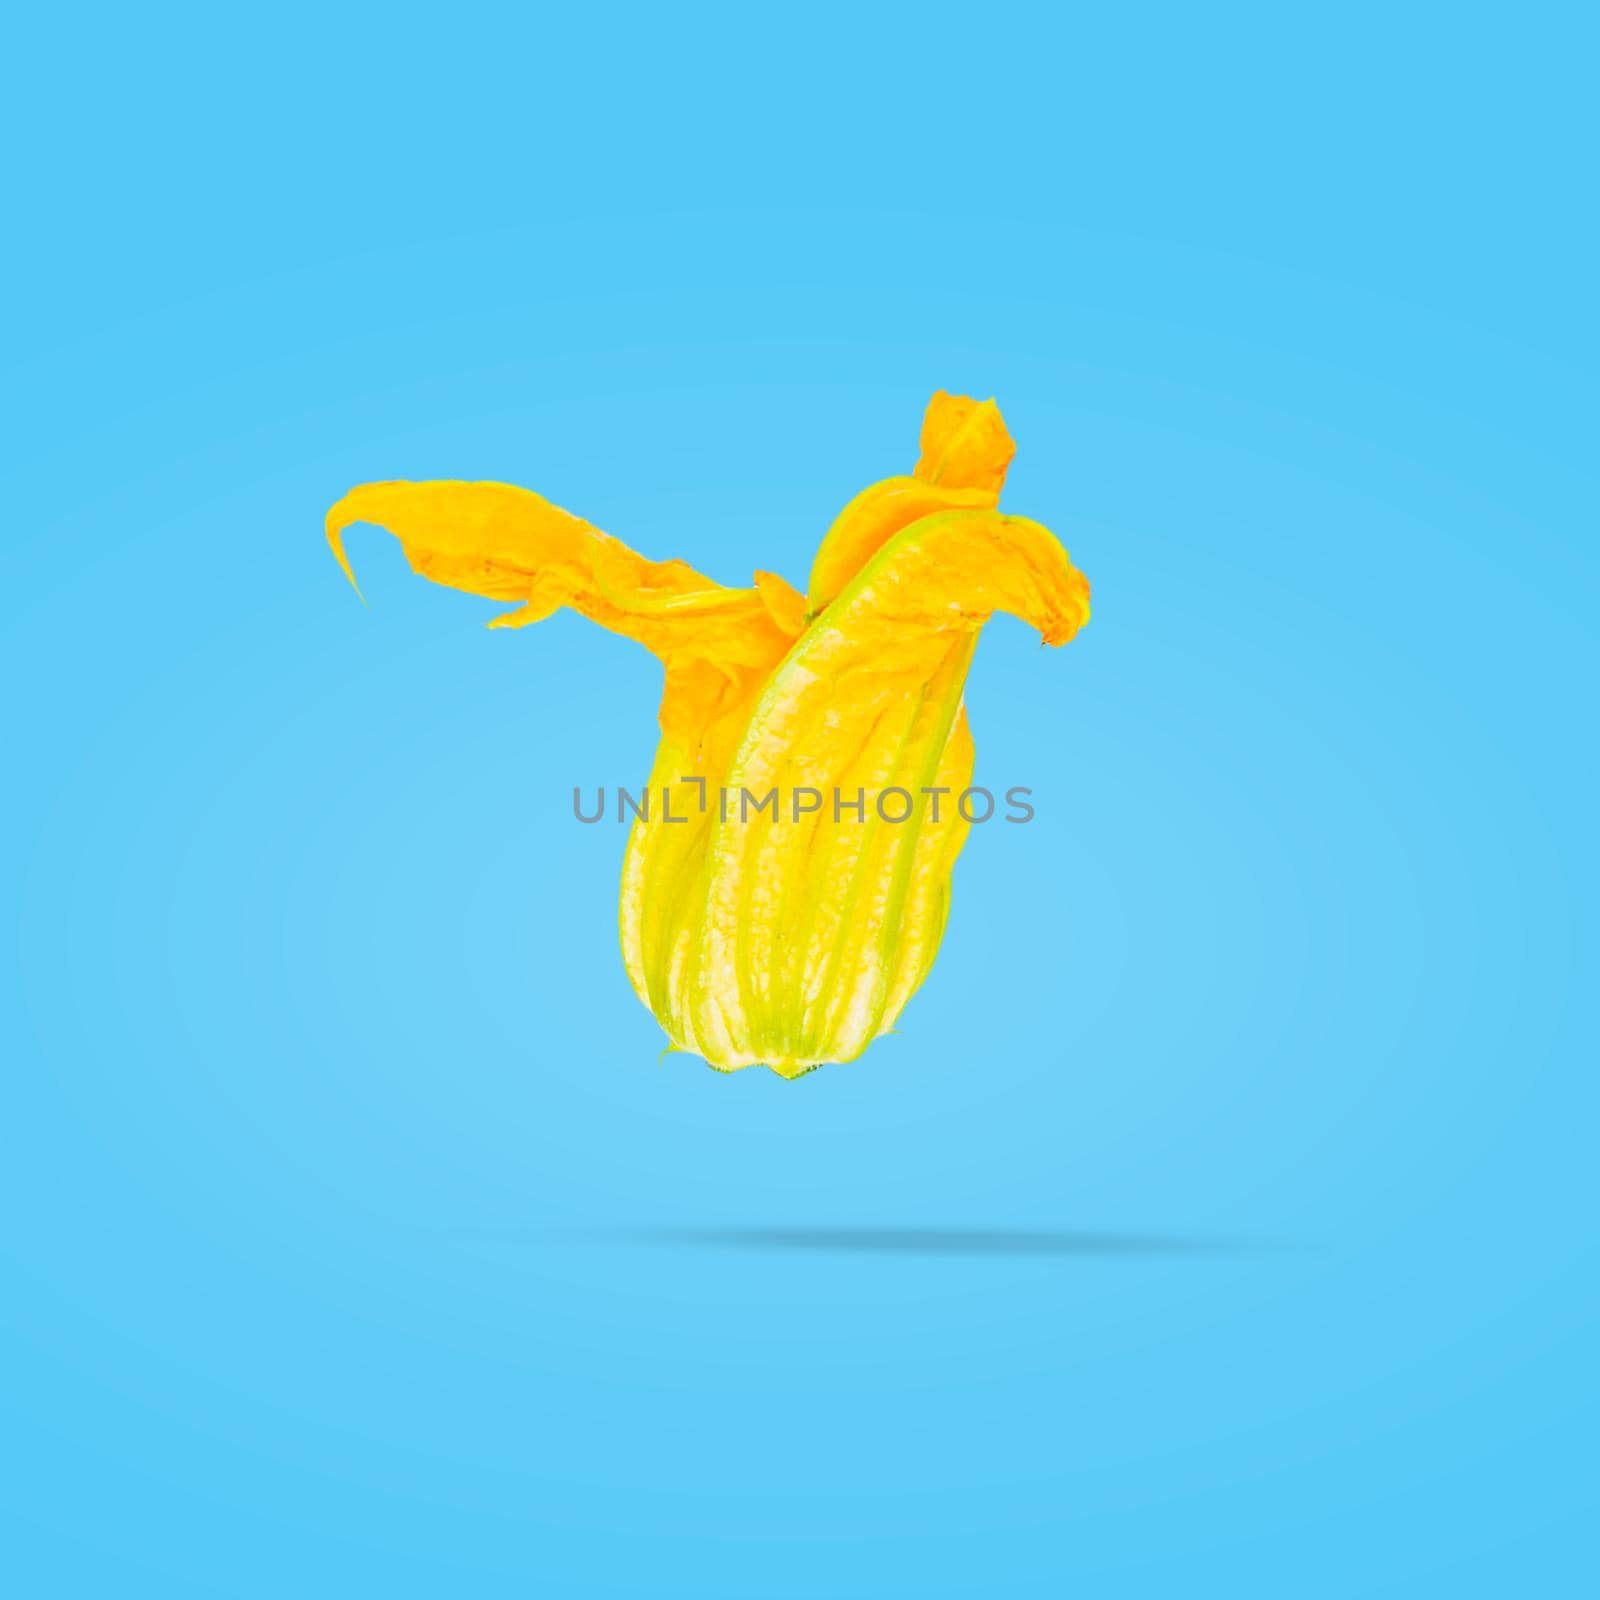 Isolated vegetables. Zucchini flowers for advertisement. Packaging concept. Full depth of field. Clip art image for package design.